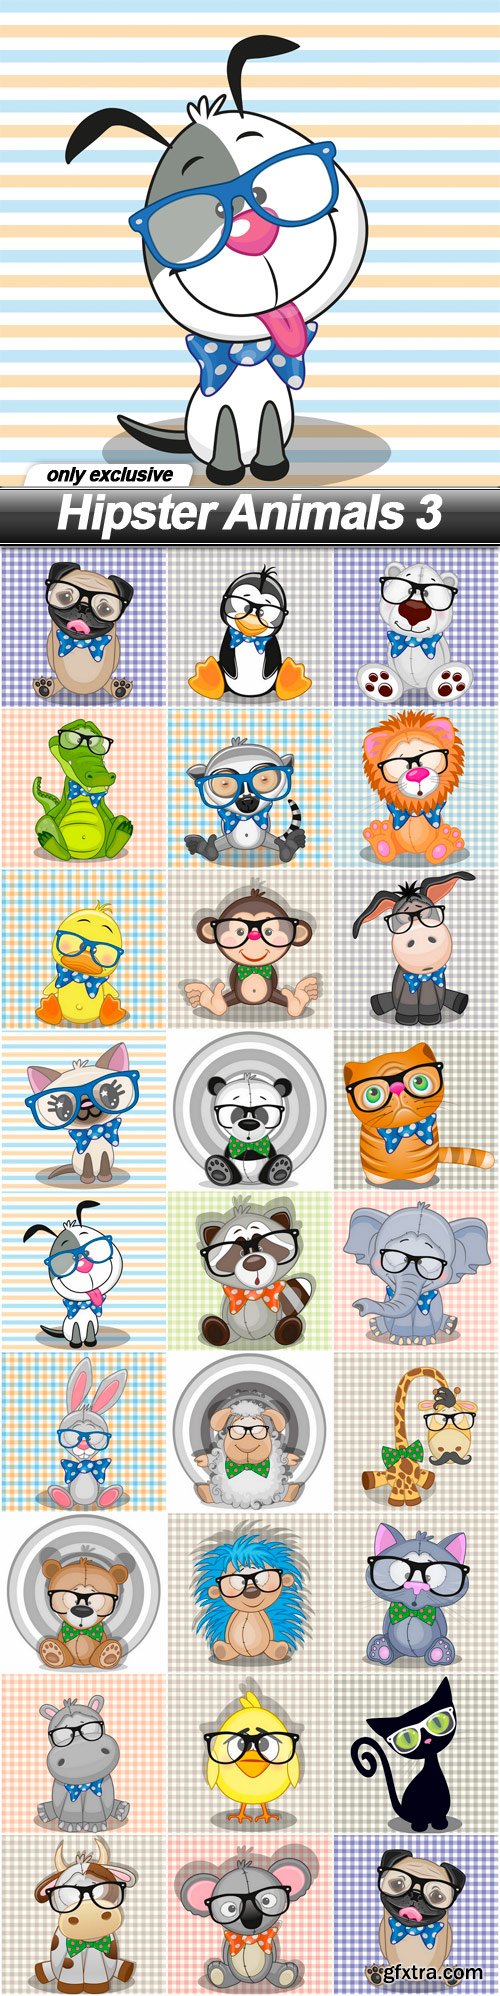 Hipster Animals 3 - 26 EPS